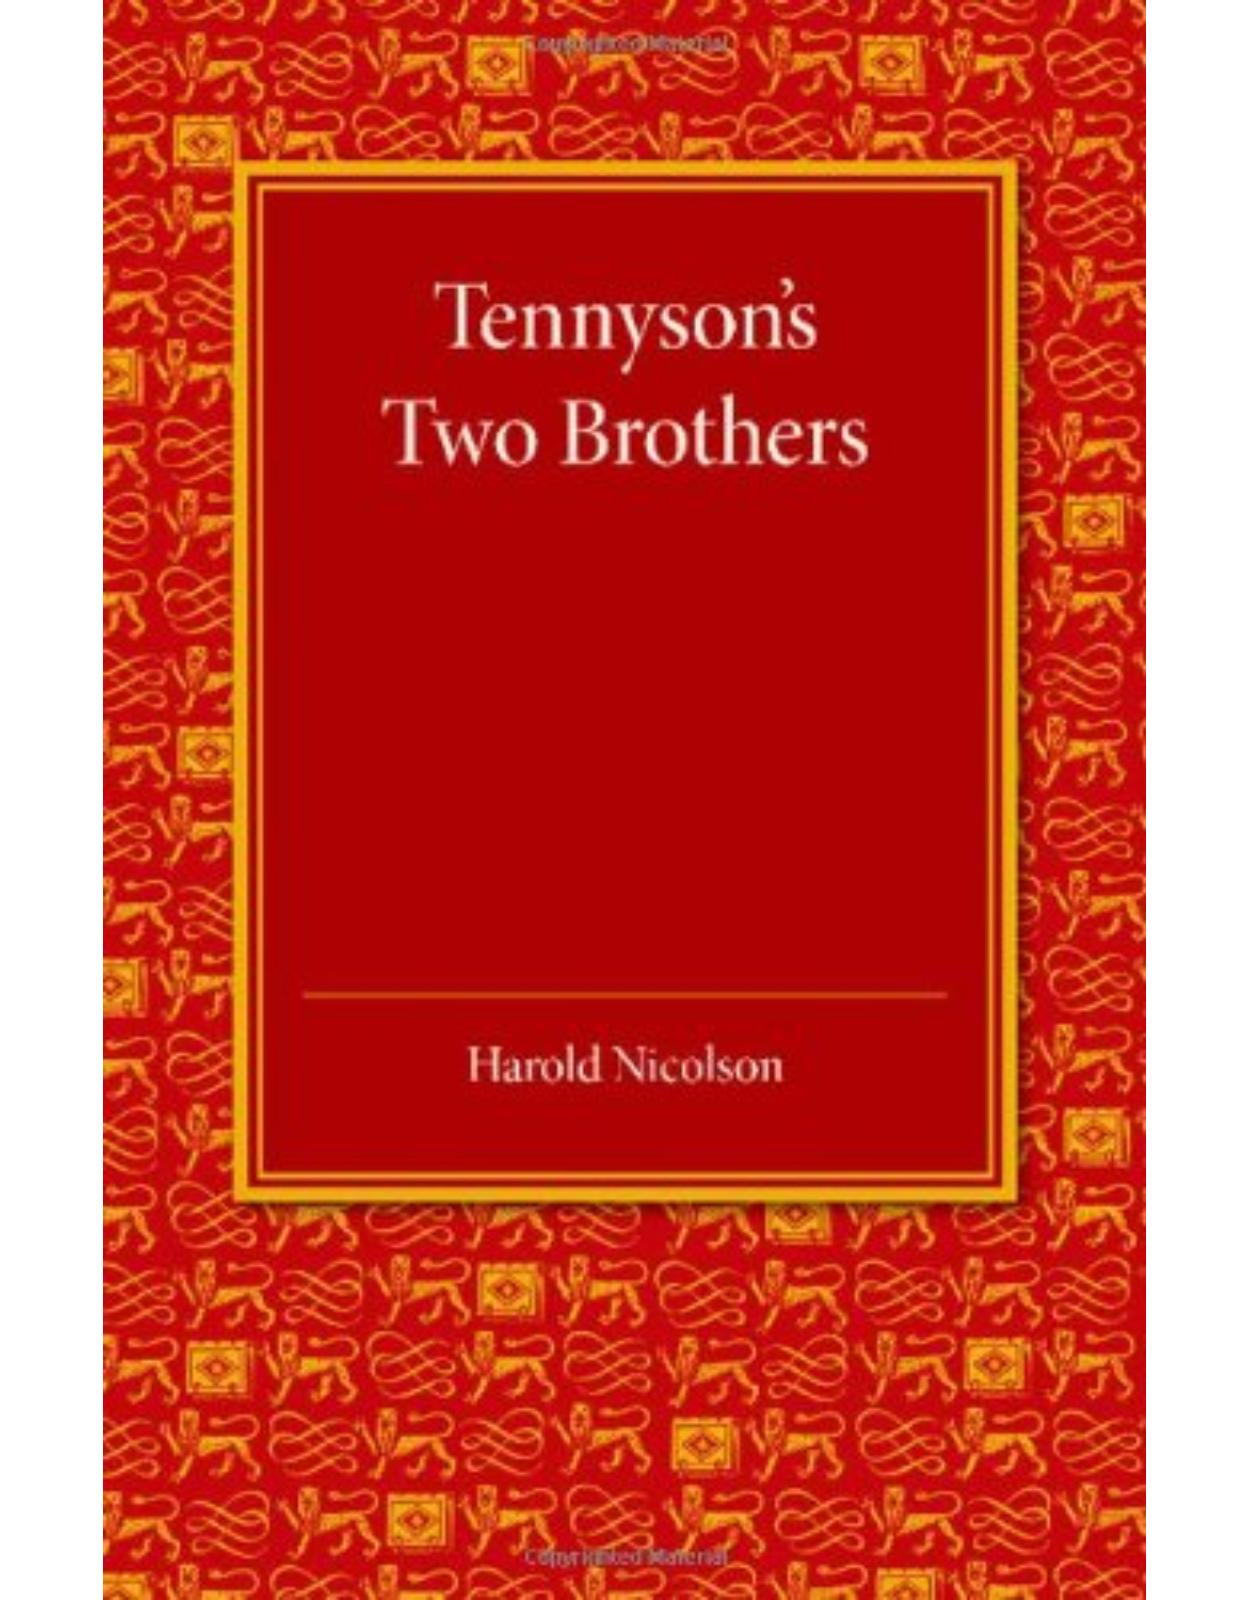 Tennyson's Two Brothers: The Leslie Stephen Lecture 1947